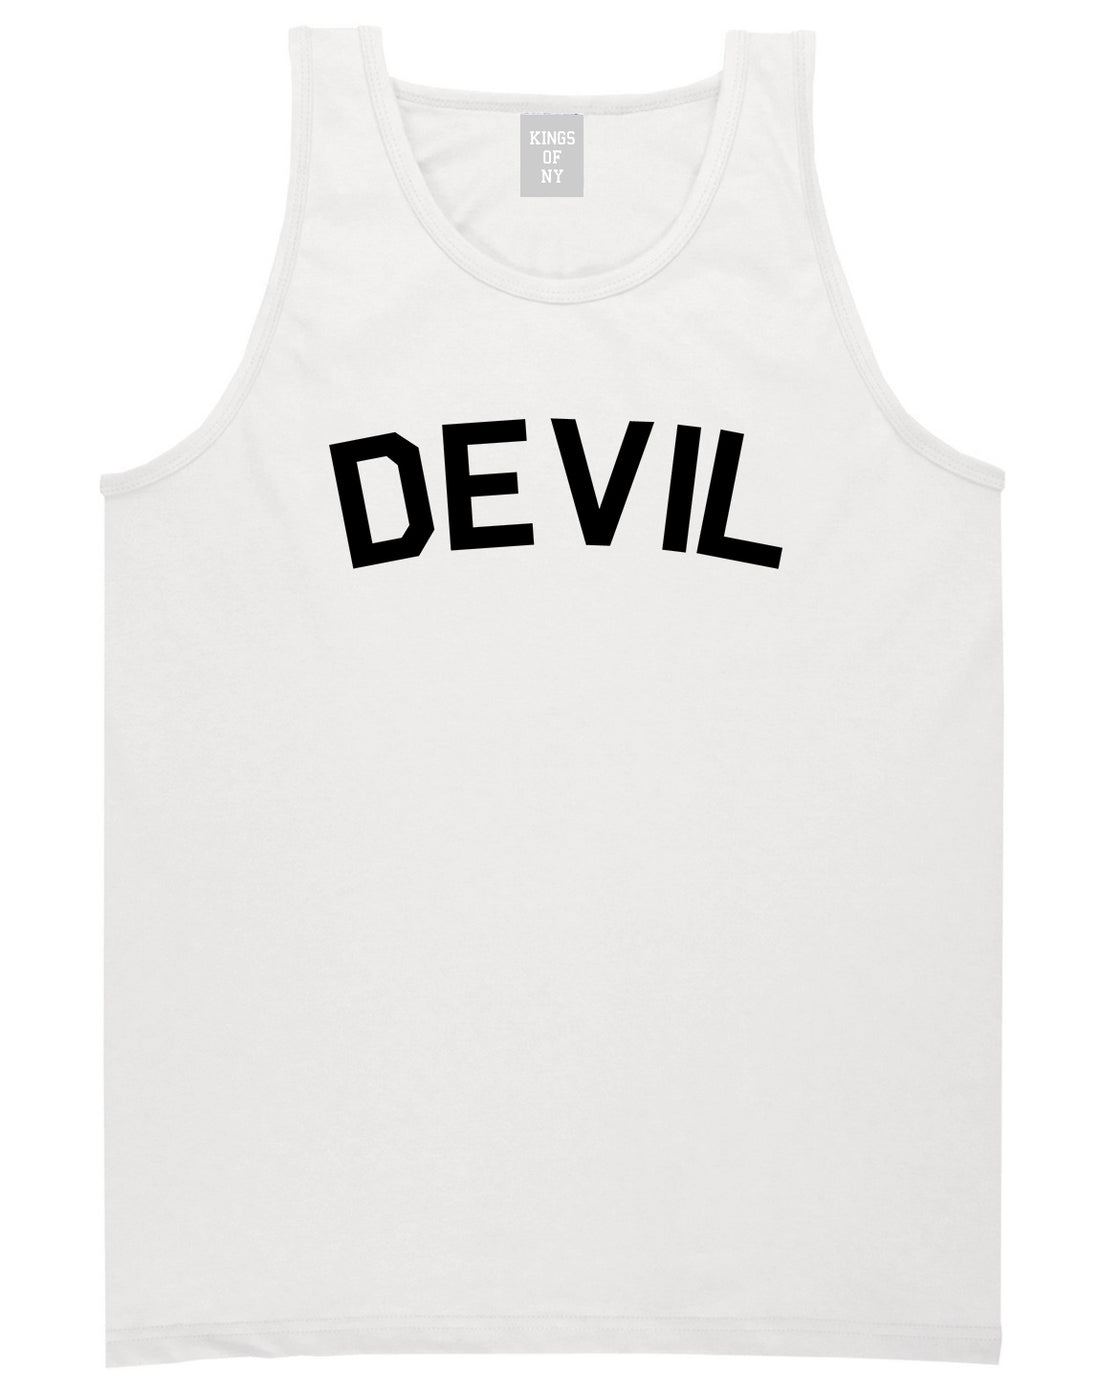 Devil Arch Goth Tank Top Shirt in White